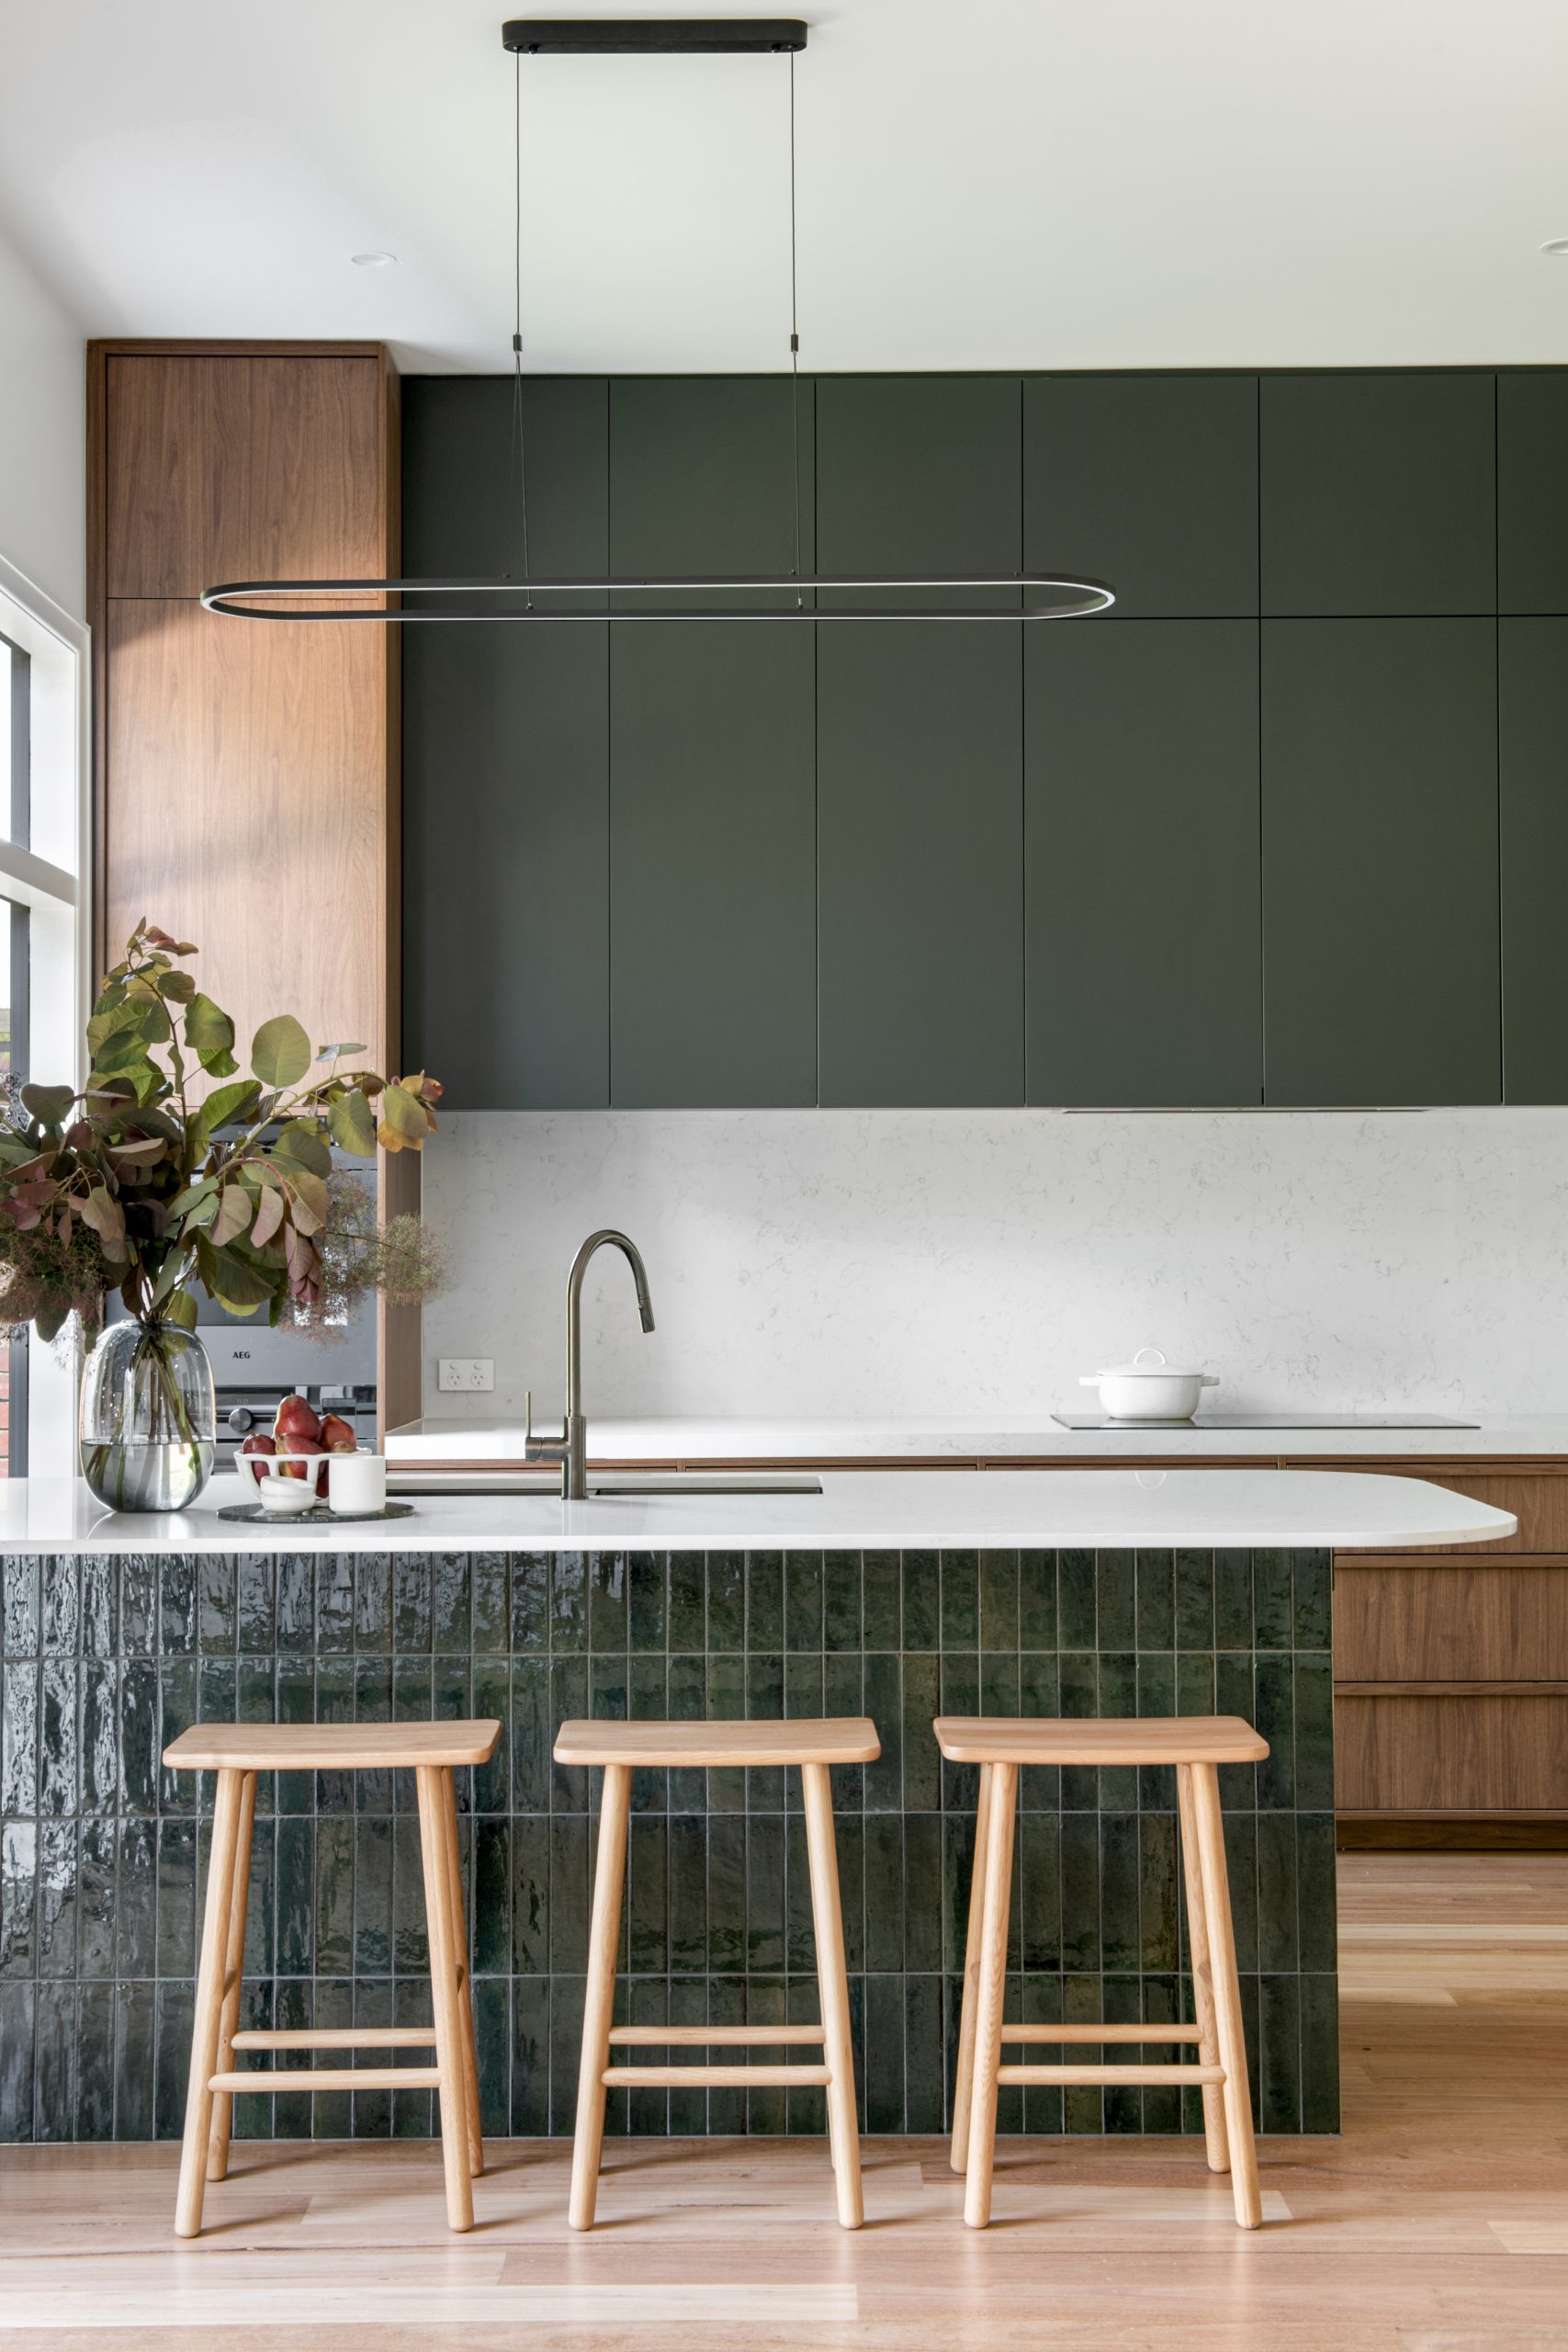 A custom designed kitchen featuring walnut joinery and handmade gloss green tiles. Built by M.J. Harris Group